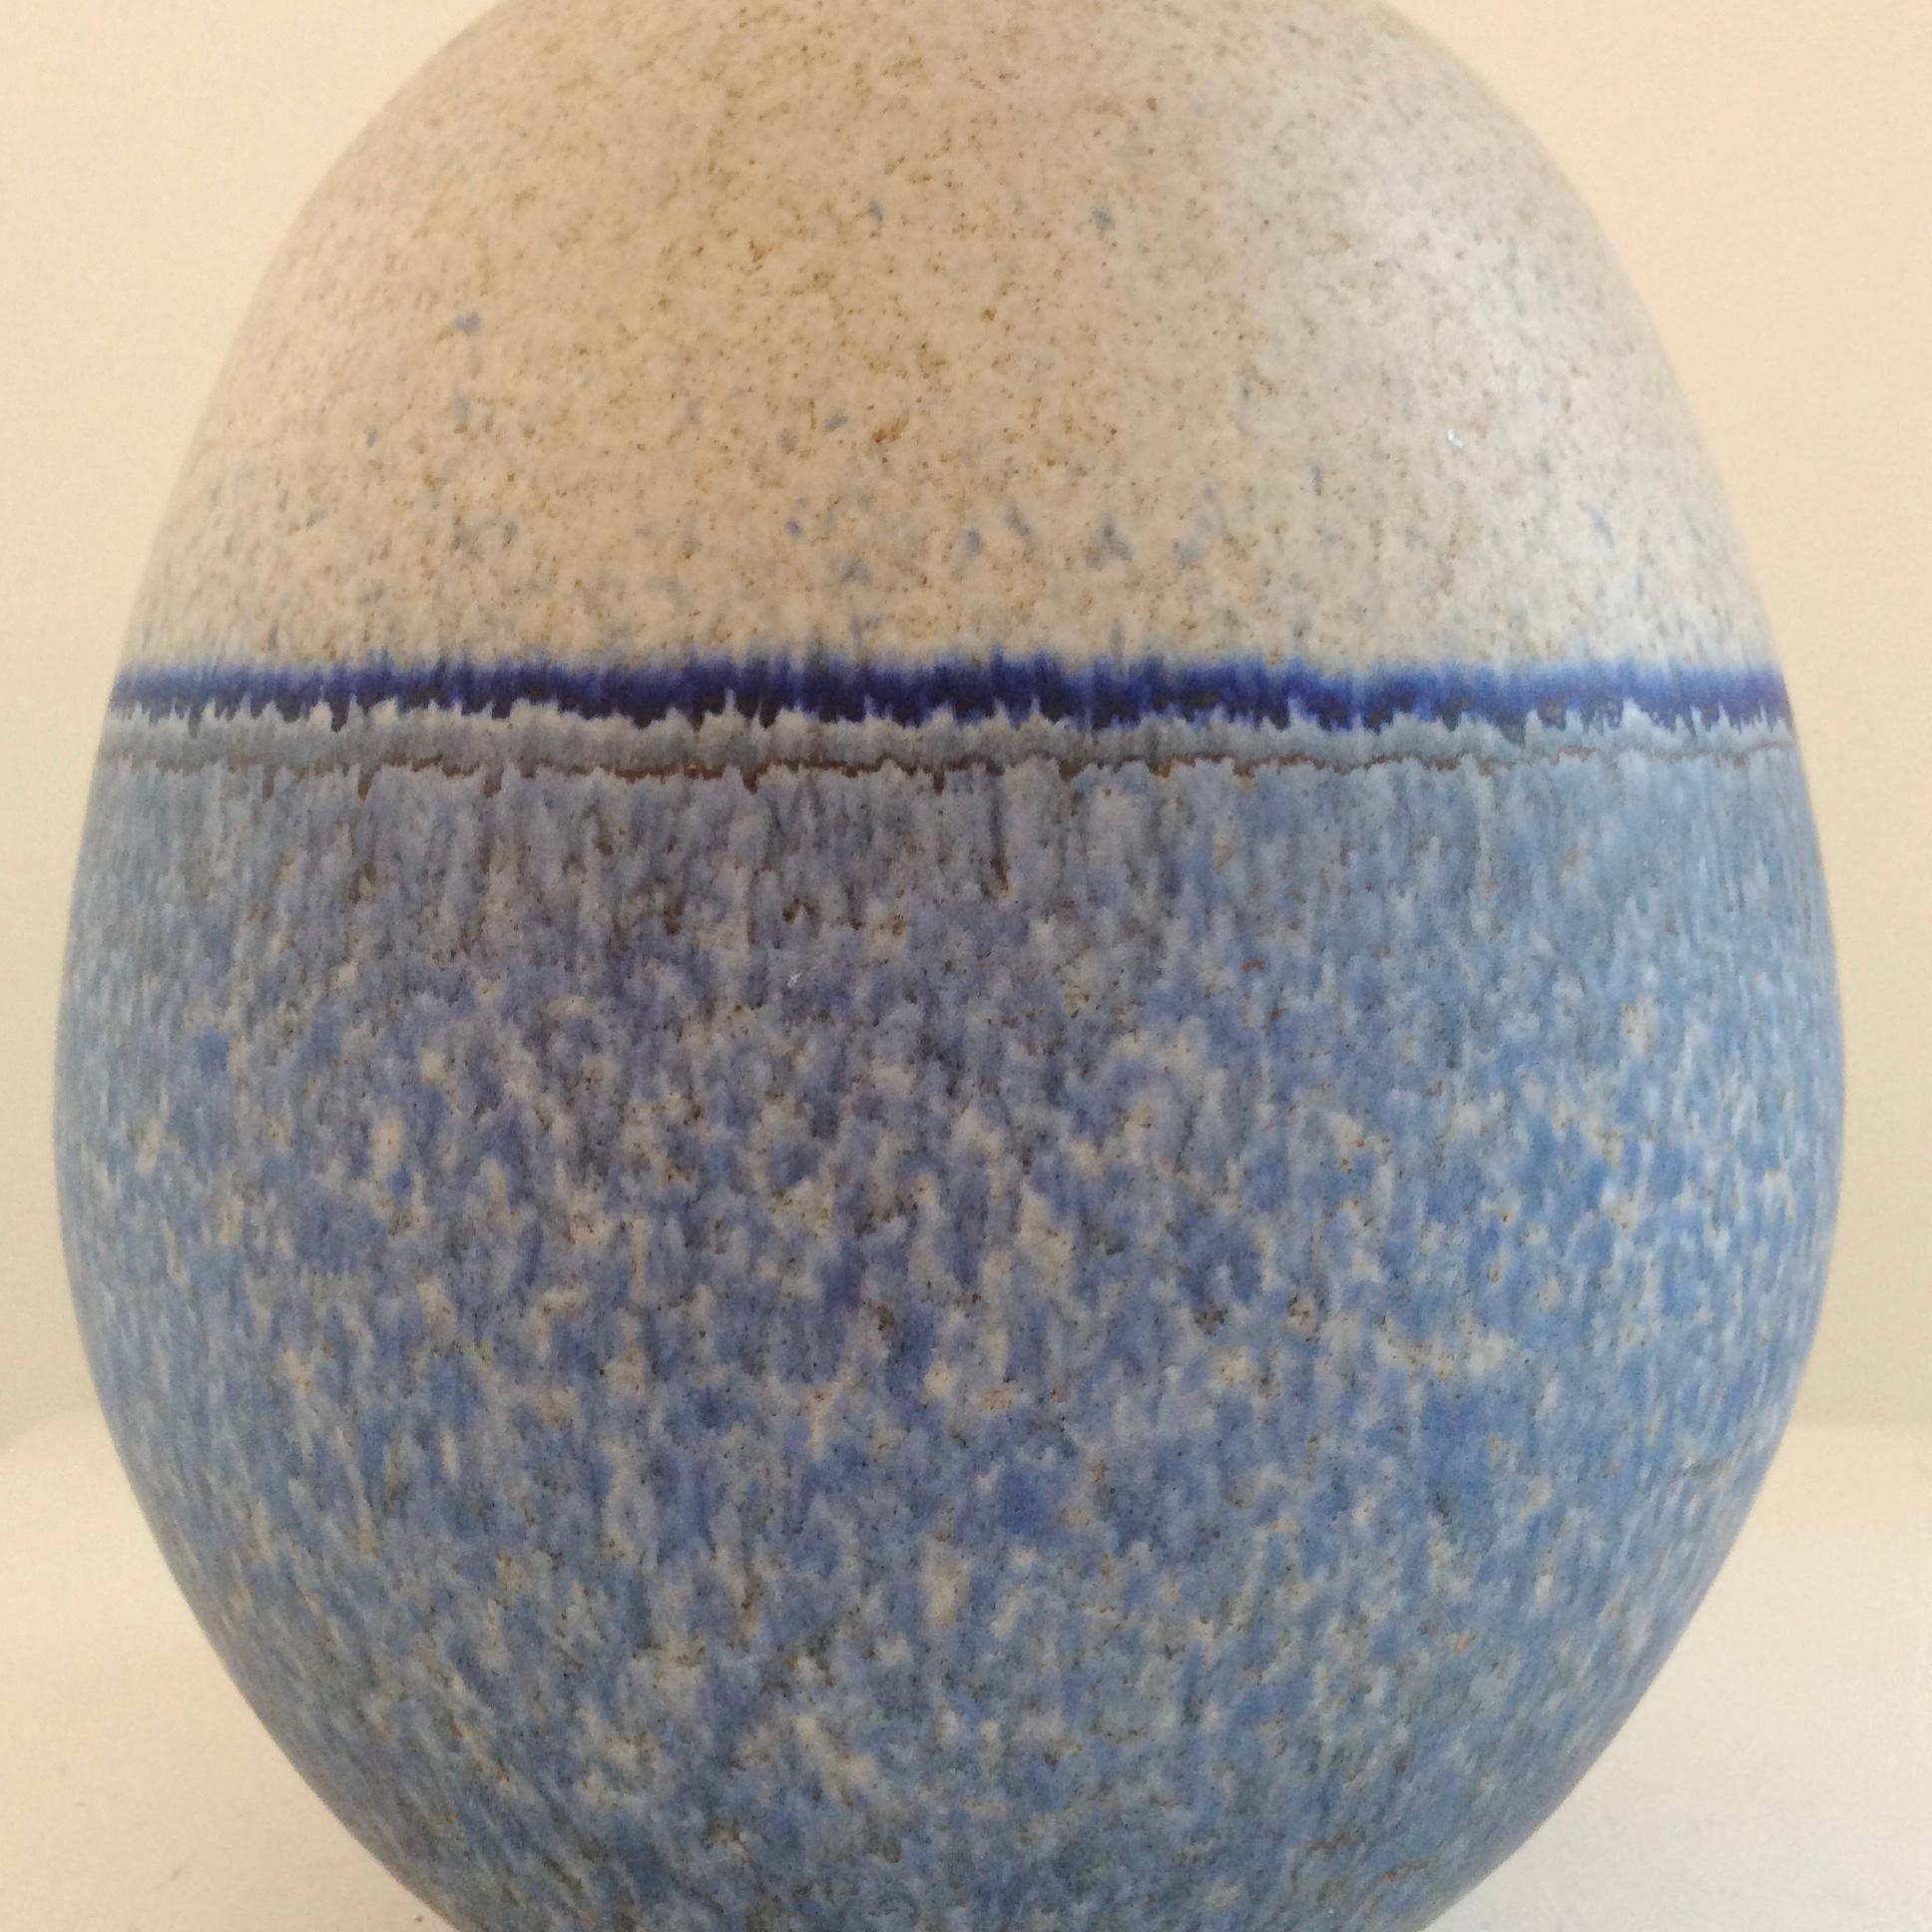 Beautiful Joan Carrillo vase, circa 1975, Spain.
Blue and crema ceramic.
Dimensions: 19 cm H, 15 cm diameter.
Good condition.
All purchases are covered by our Buyer Protection Guarantee.
This item can be returned within 14 days of delivery.
We ship